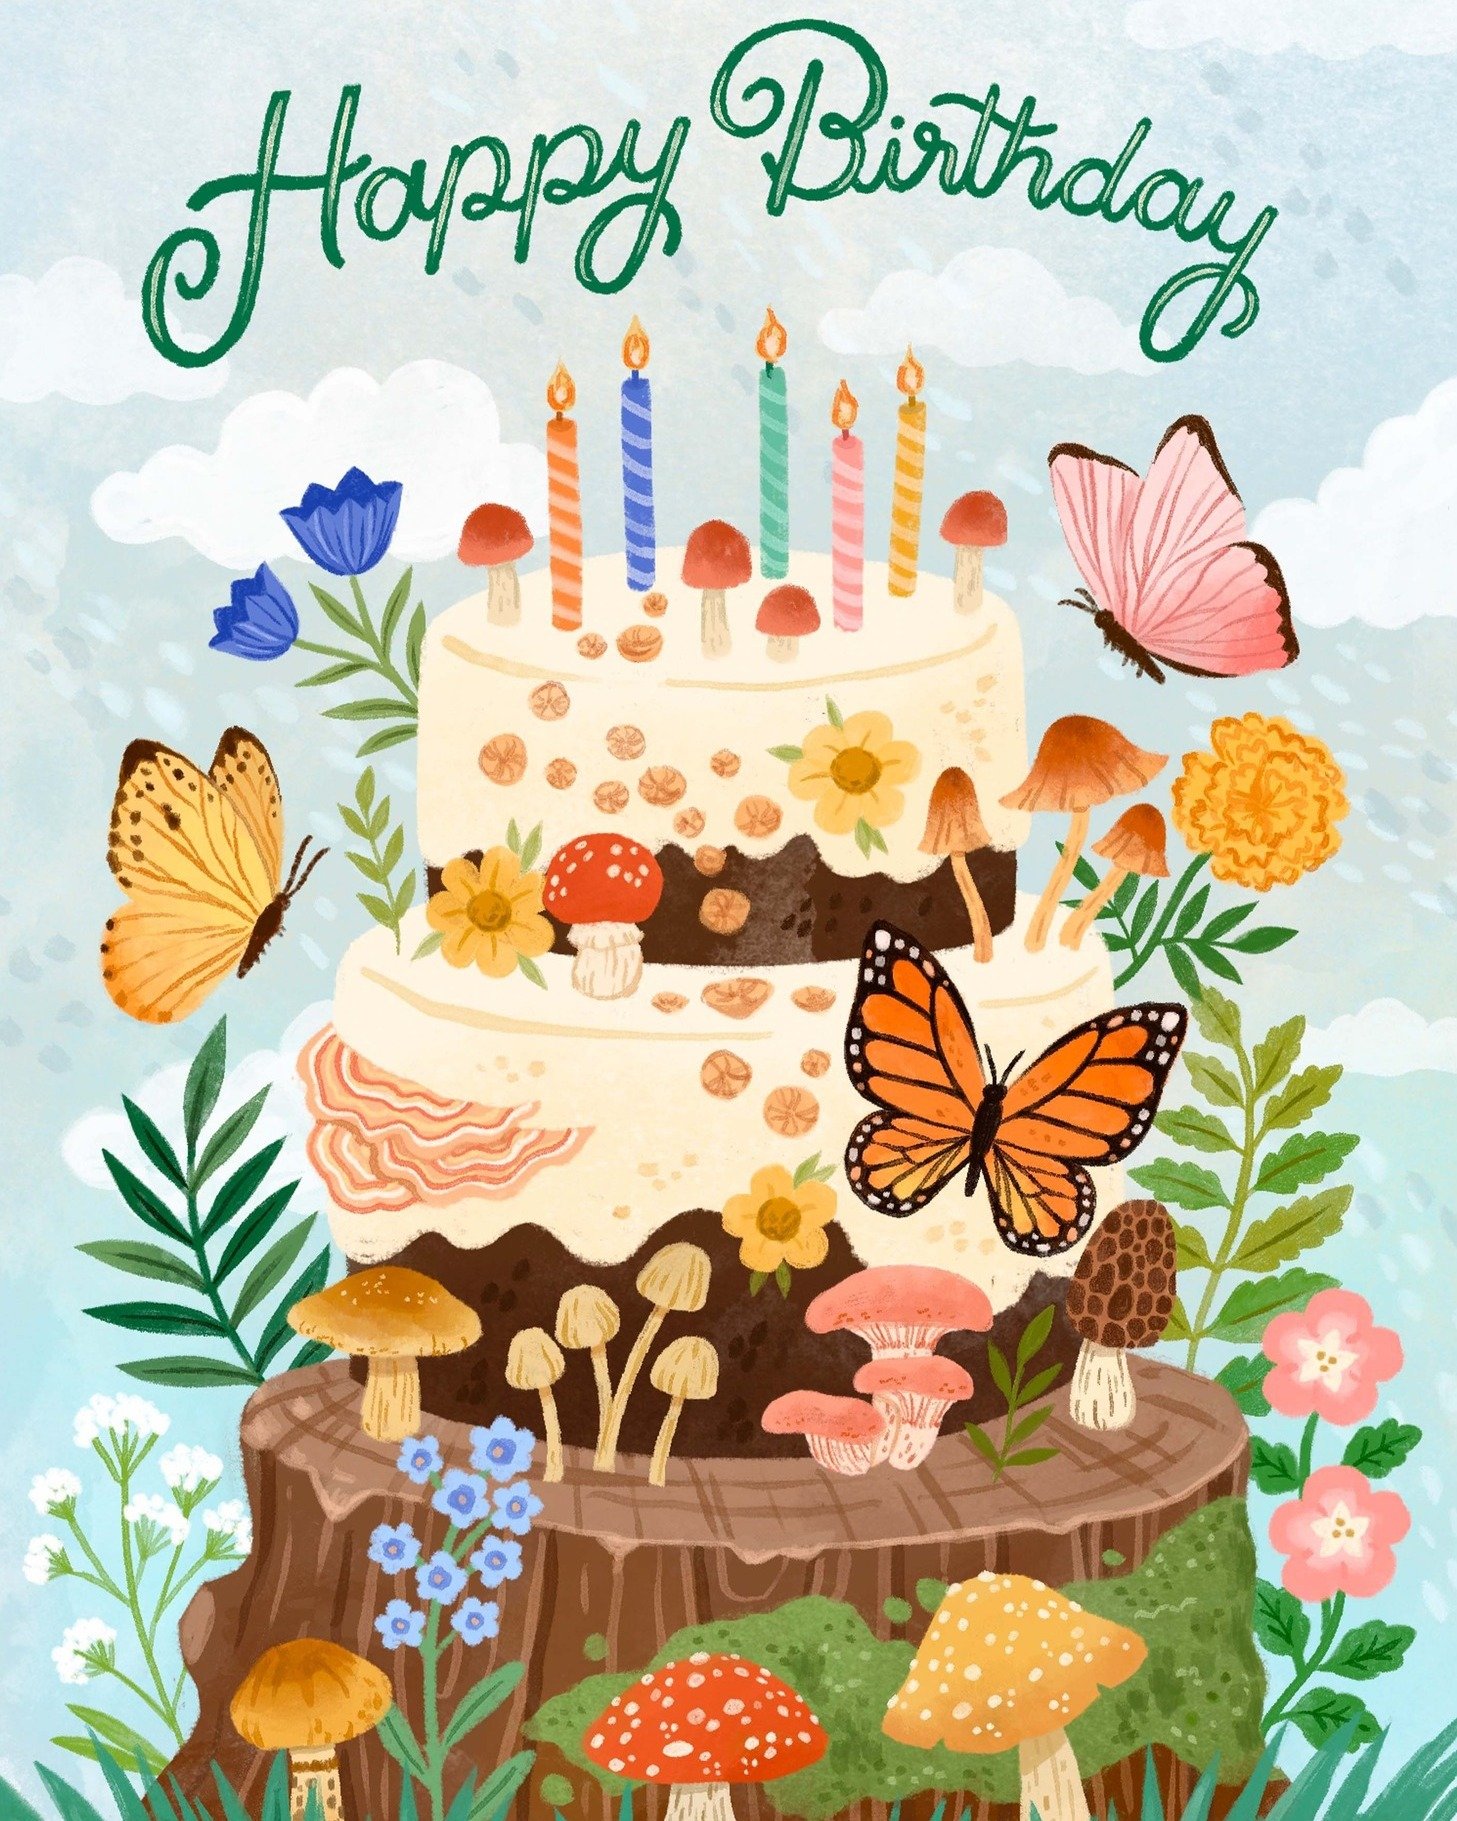 A beautiful birthday cake &amp; butterfly celebration from @nataliebriscoeillustration! This one goes out to all the Tauruses out there. ♉️

 #surfacedesign #artlicensing #tippitytopbestestartever #artagent #jennifernelsonartists #artagency #surfaced